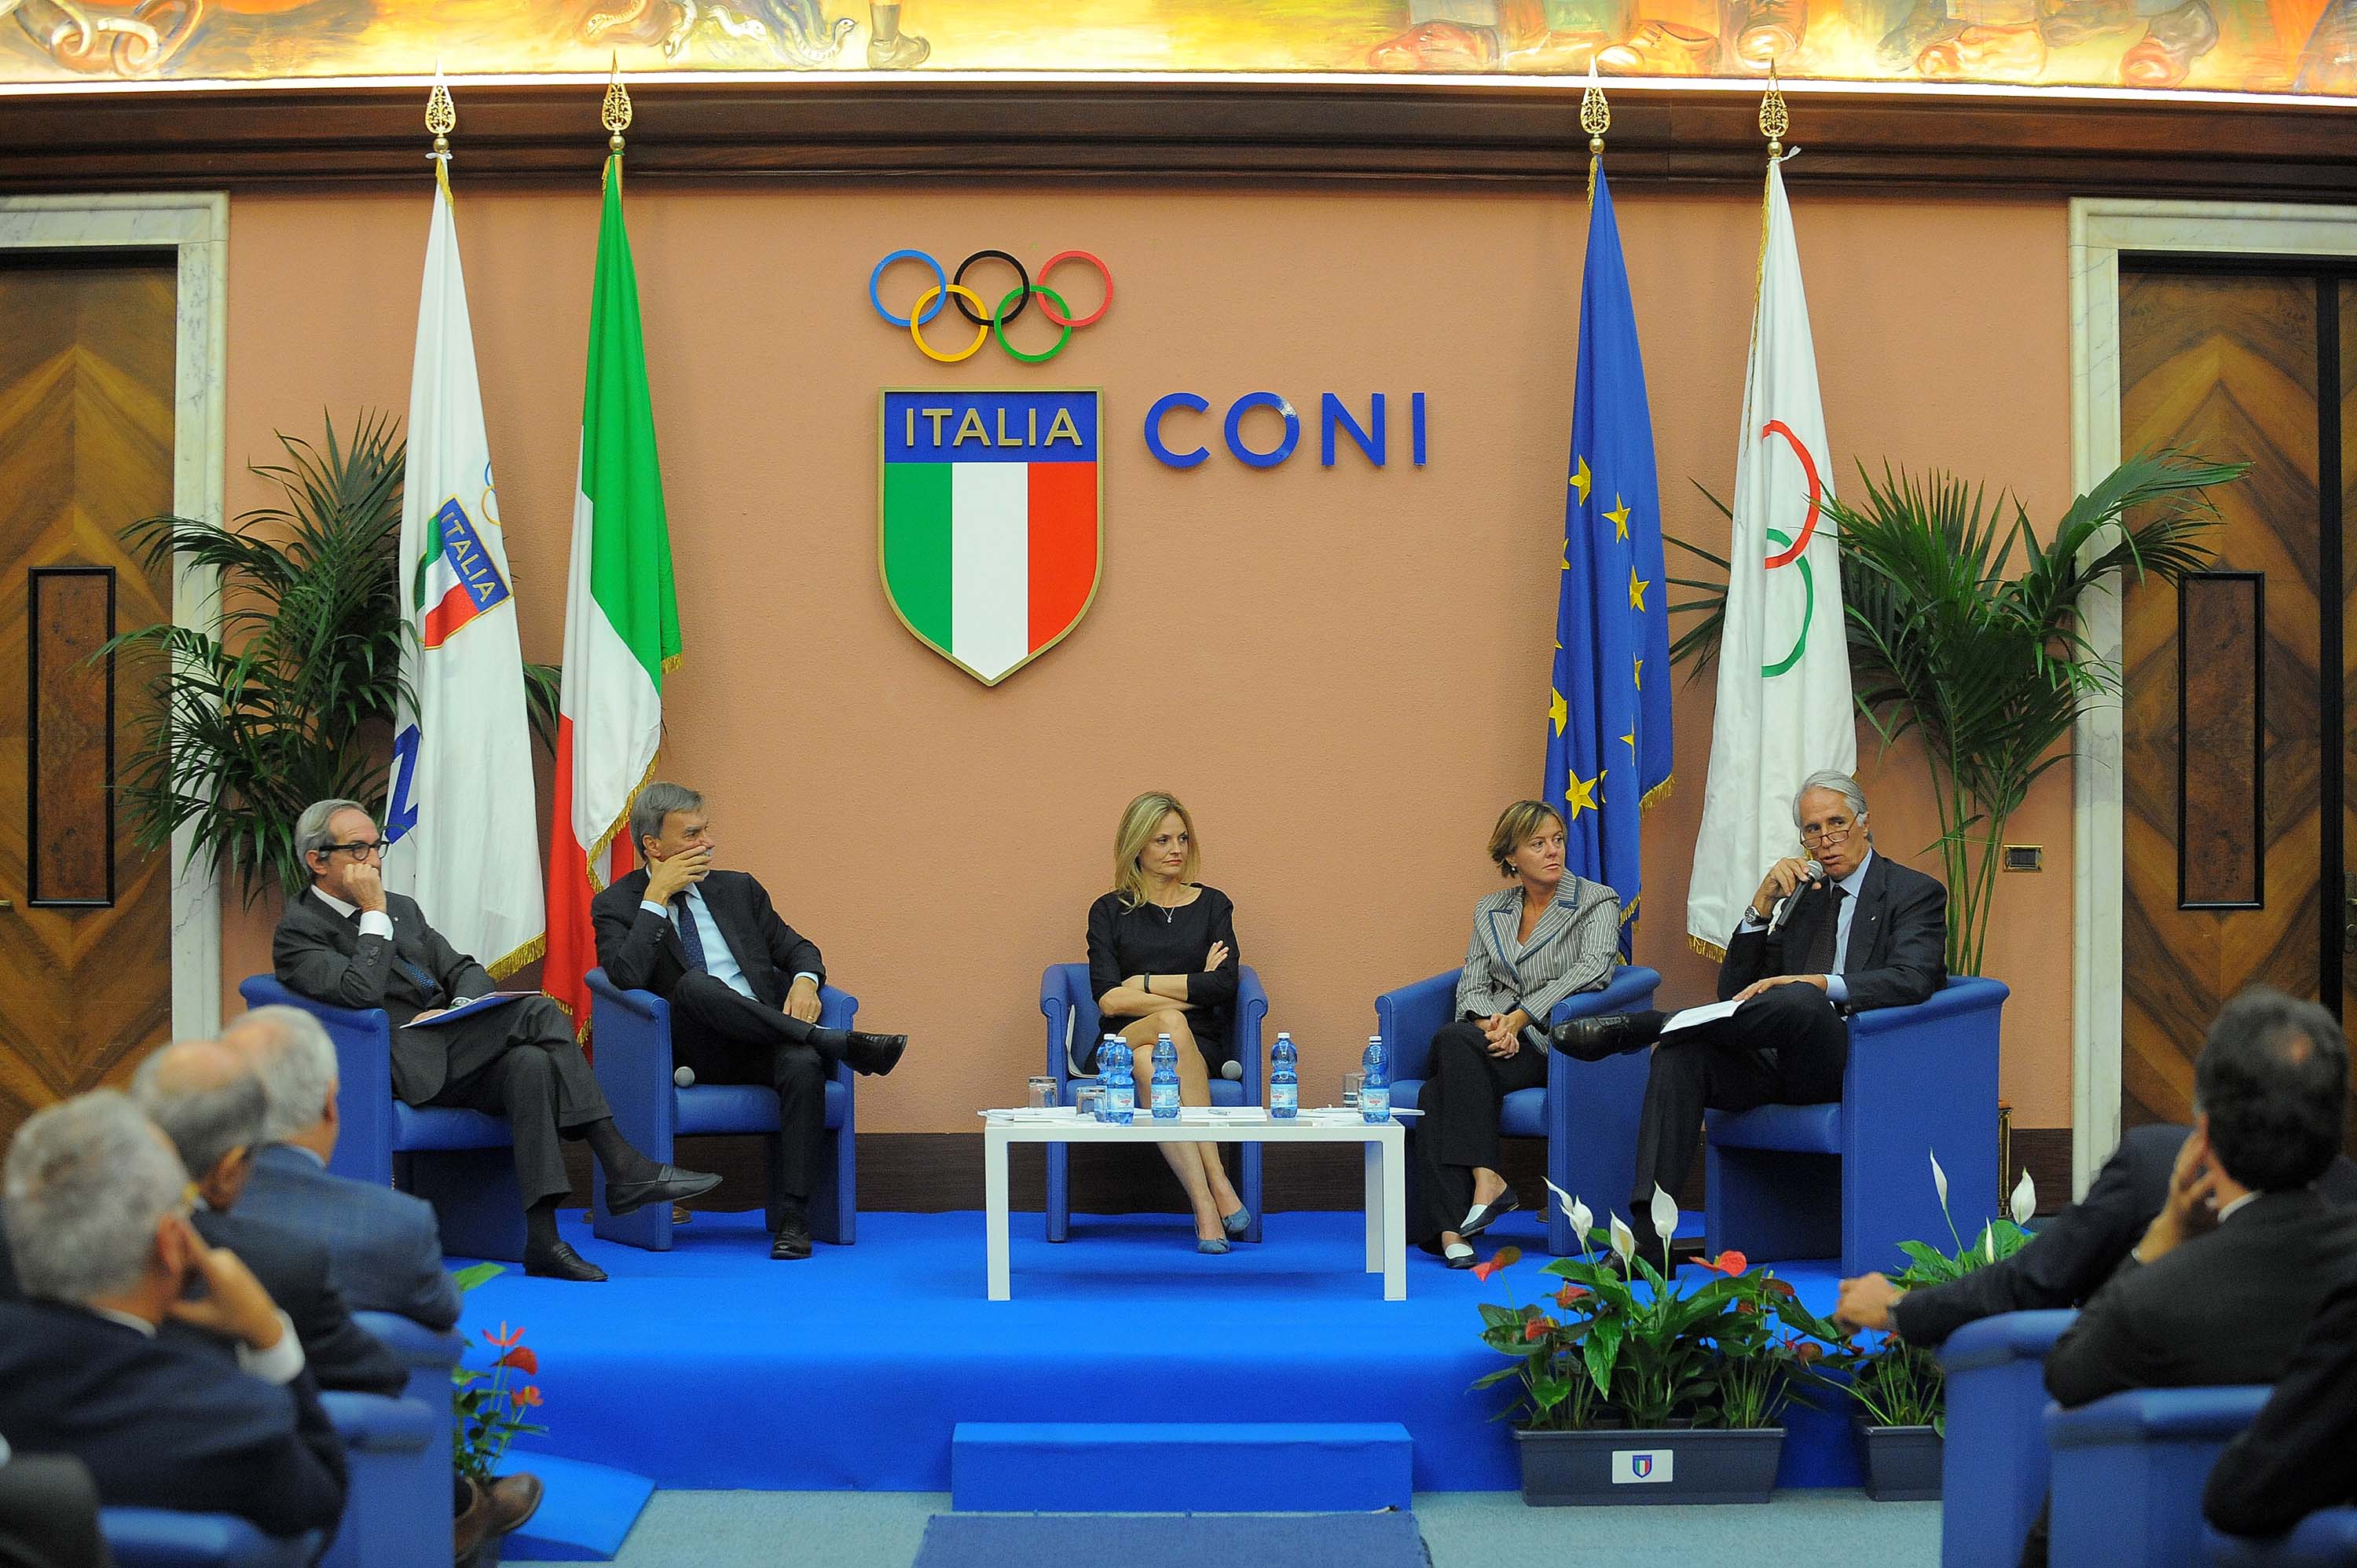 Conference "Investment in sport, counter-cyclical investment", the importance of exercise